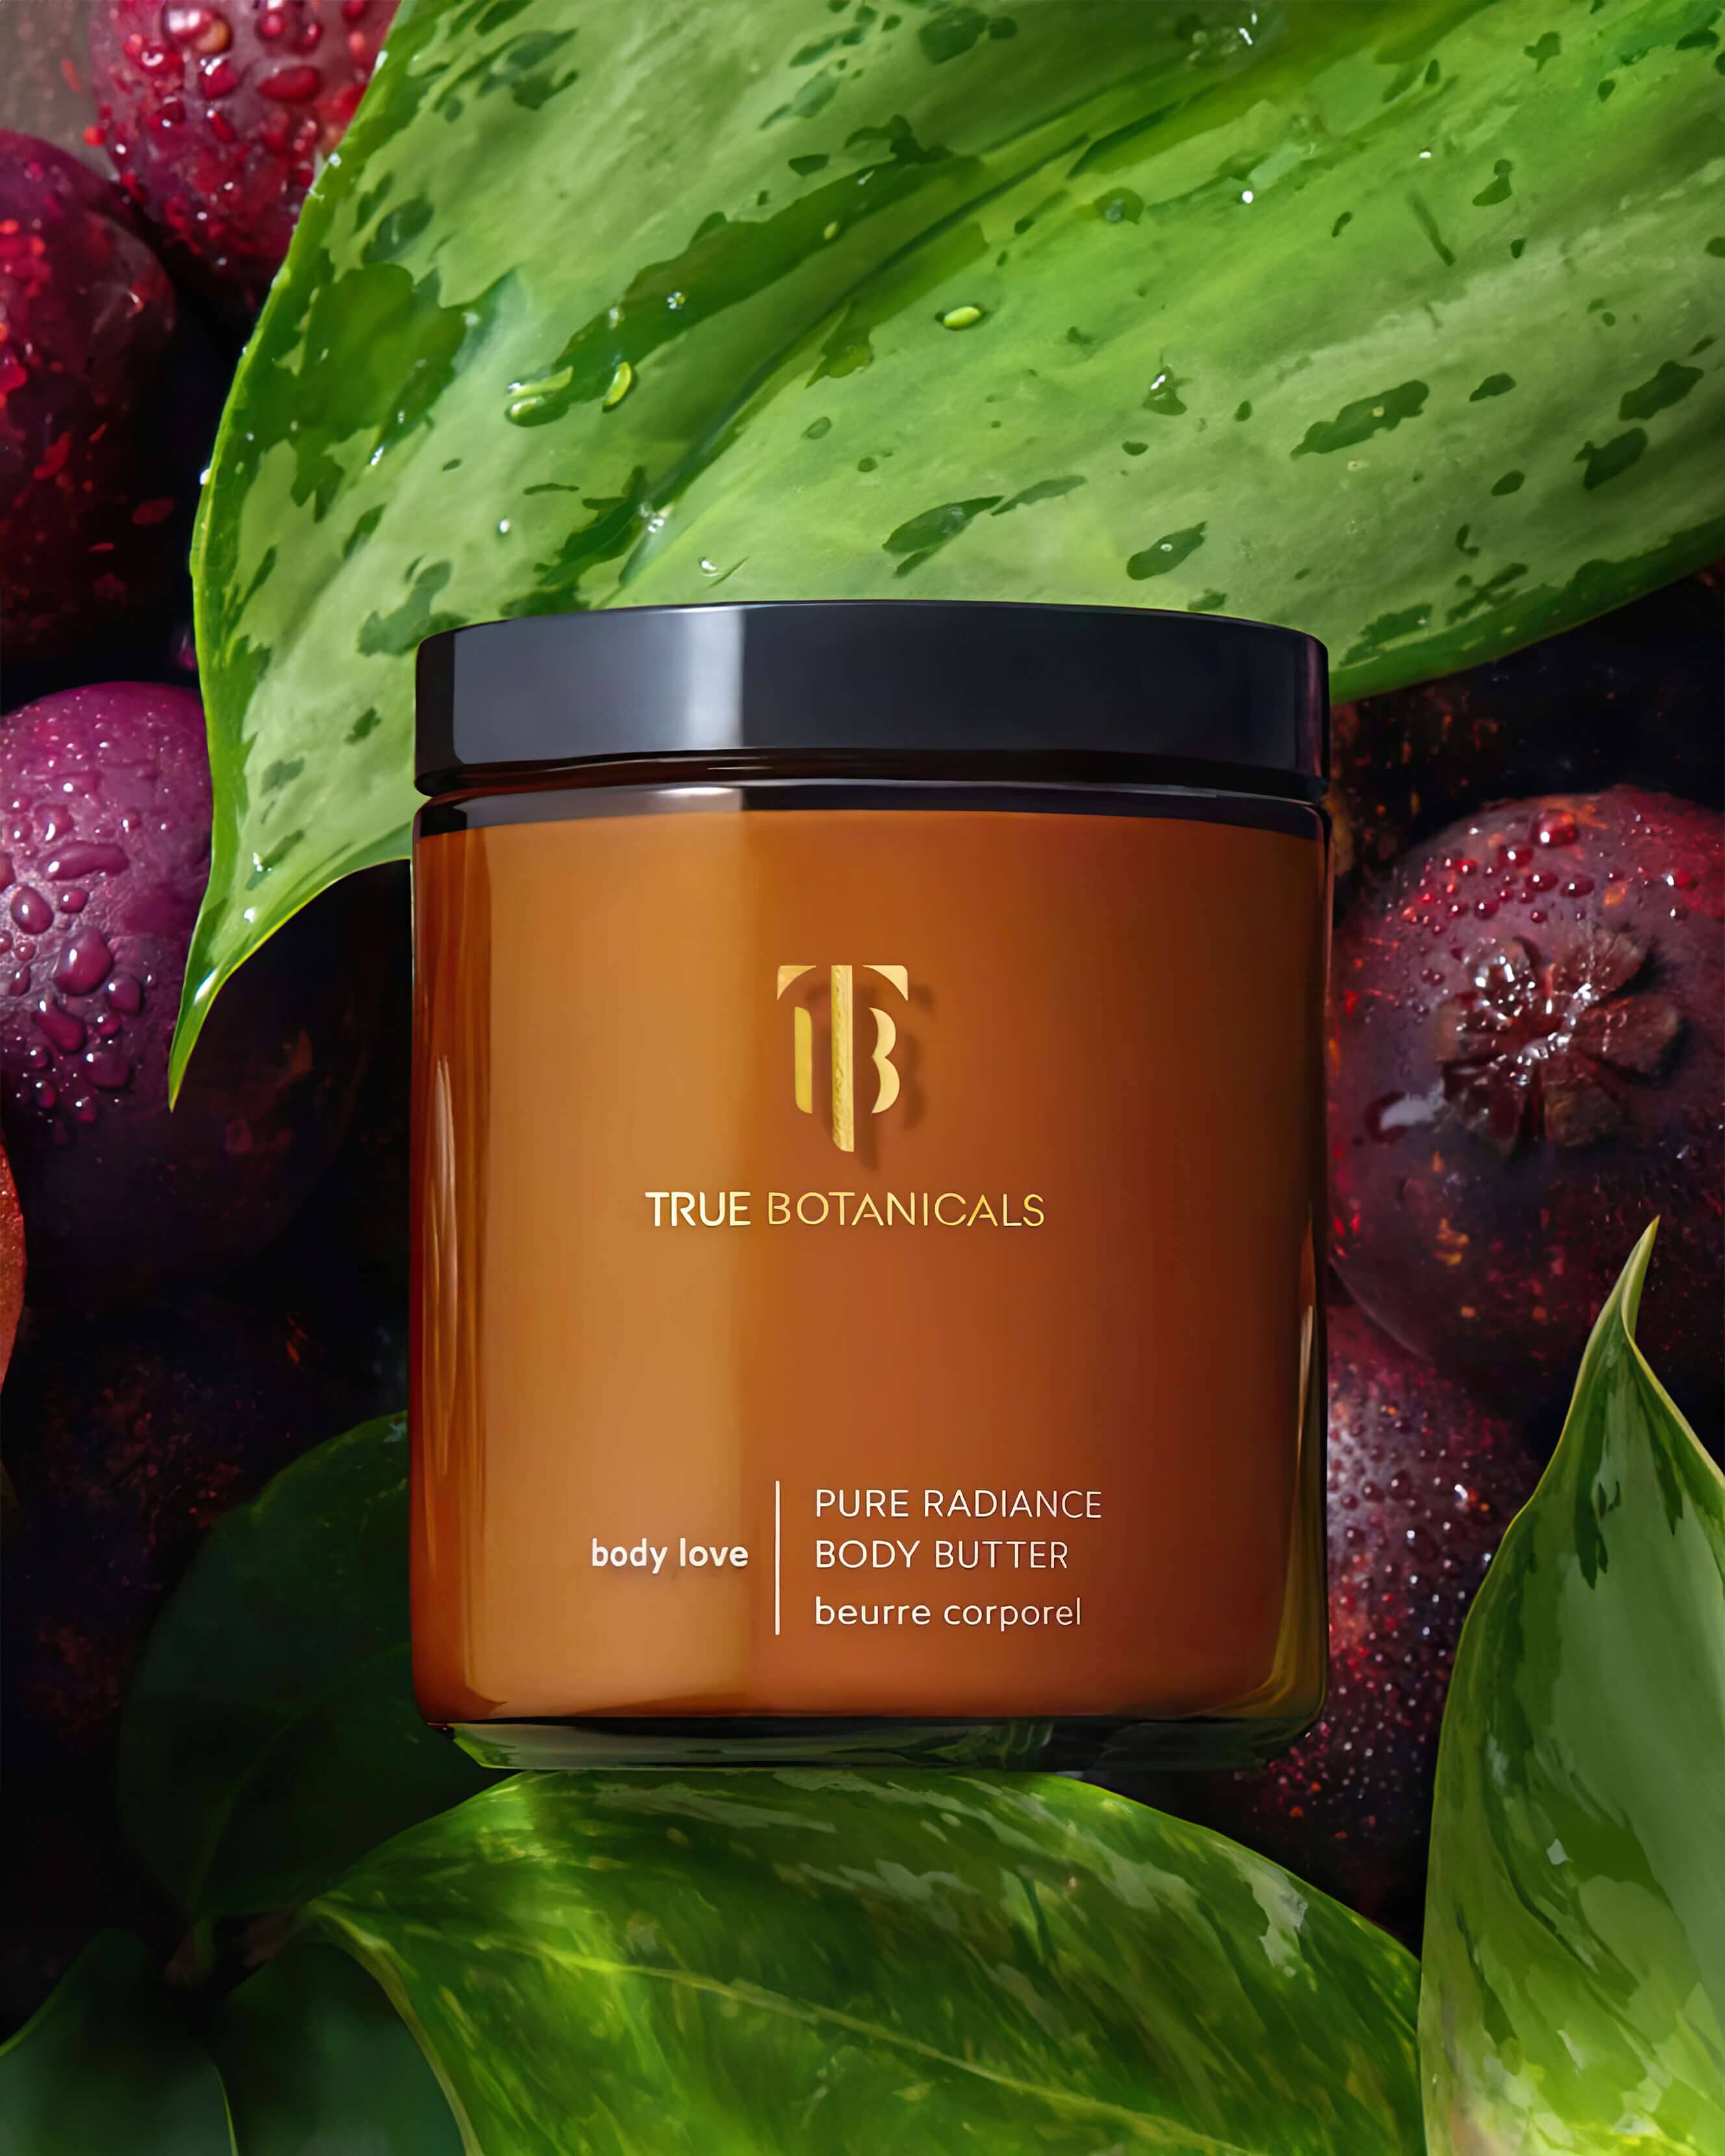 Pure Radiance Body Butter